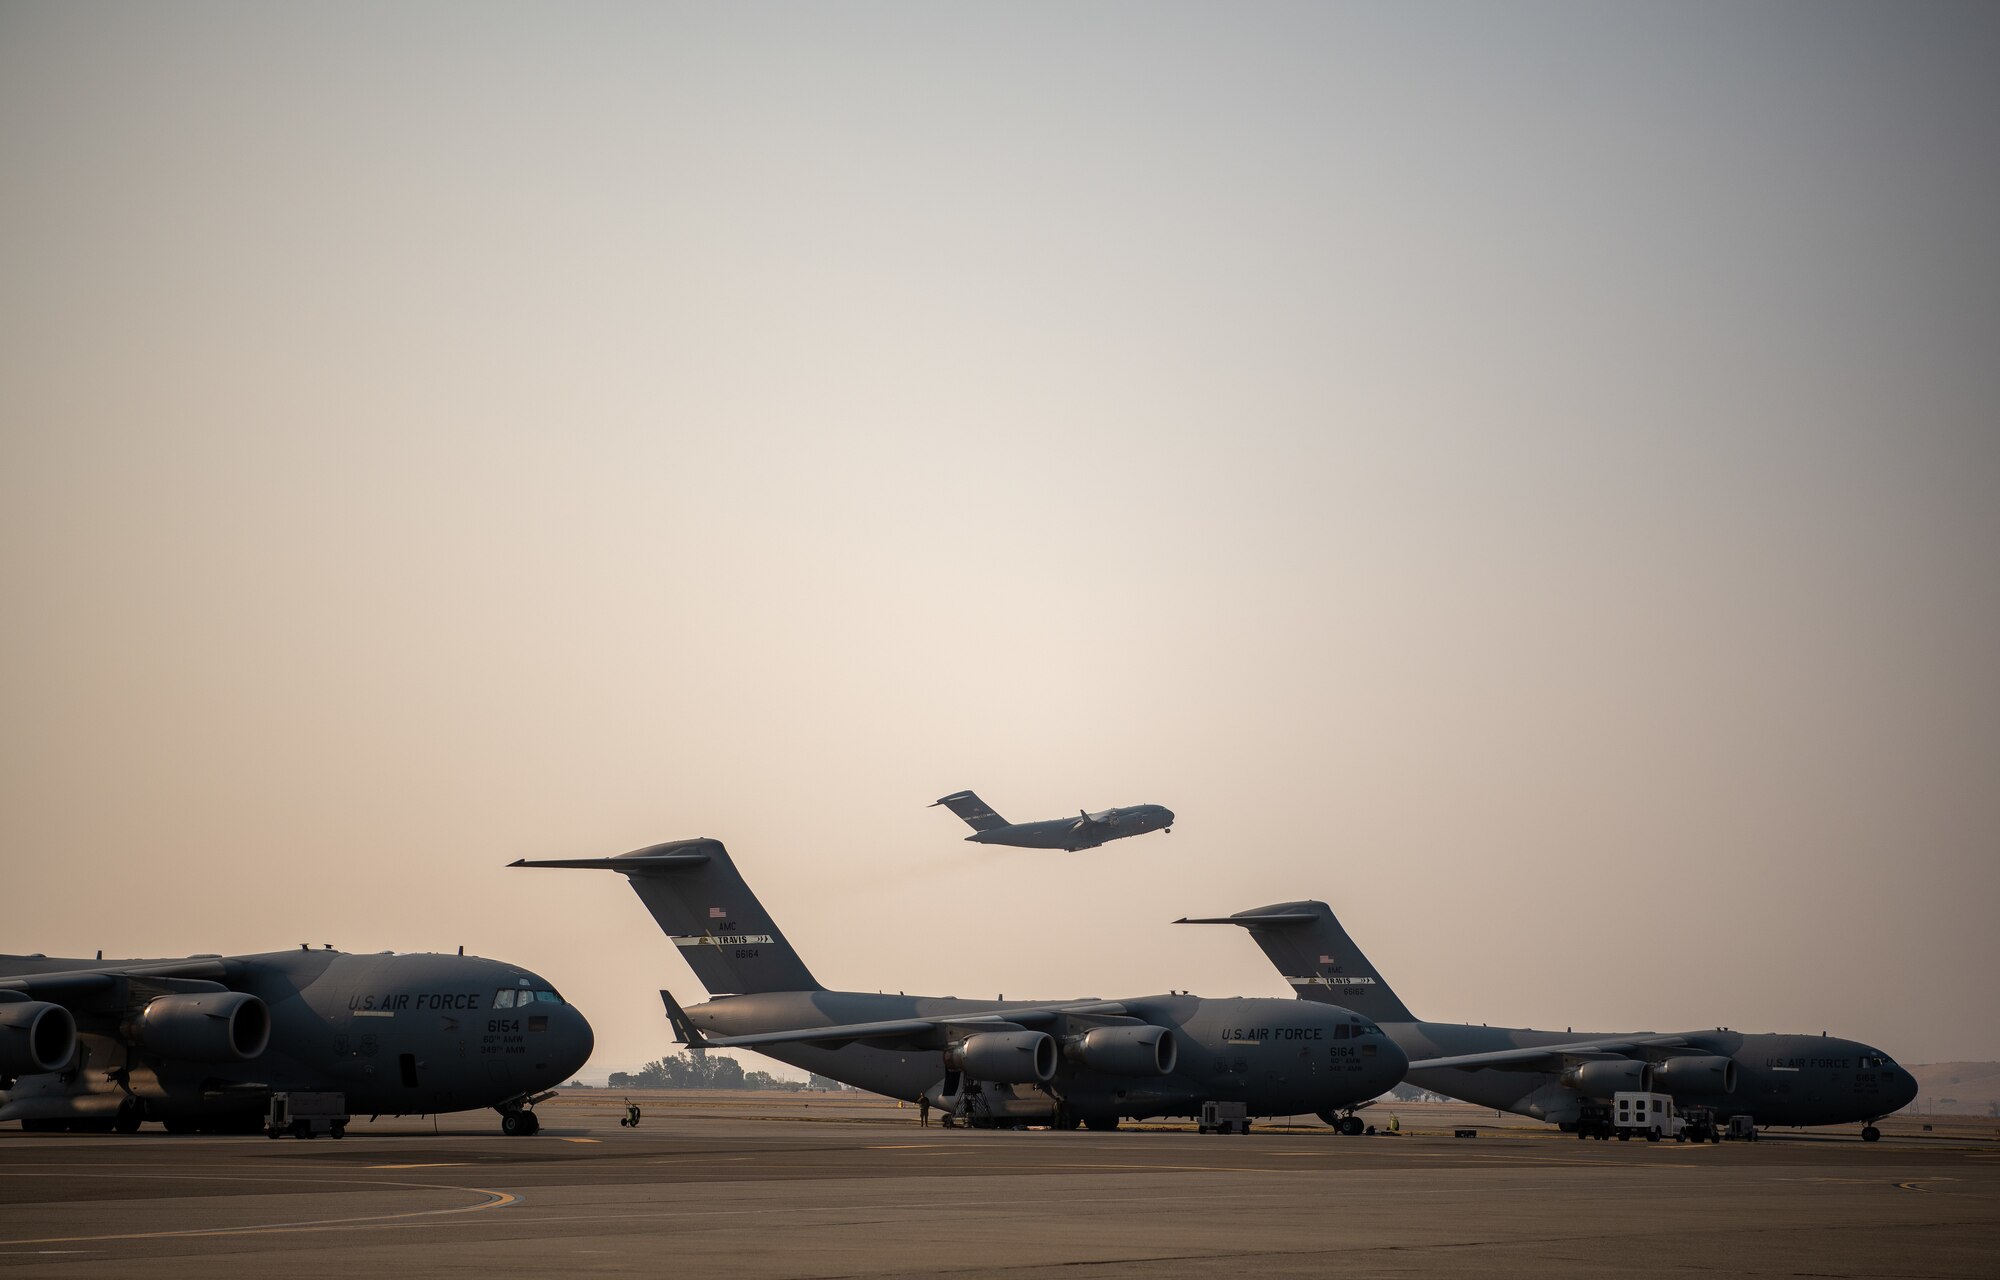 A C-17 takes off behind a row of other C-17s.